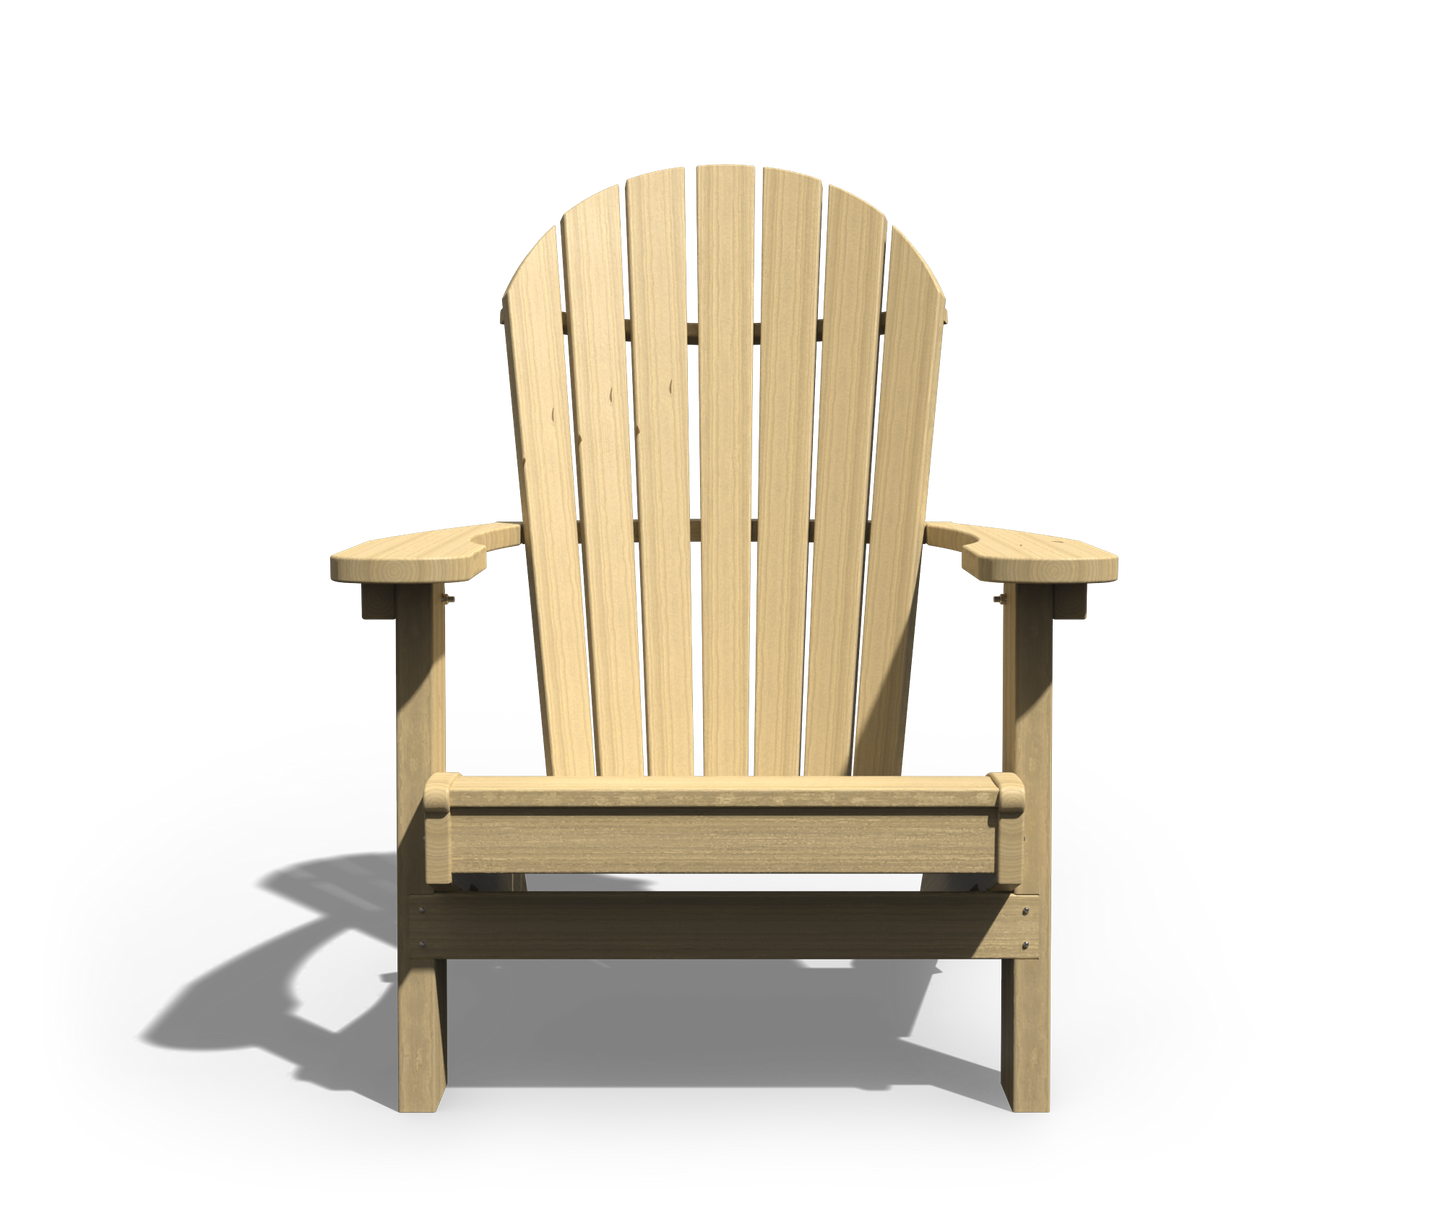 Patiova Amish Crafted Pressure Treated Pine Folding Adirondack Chair - LEAD TIME TO SHIP 3 WEEKS